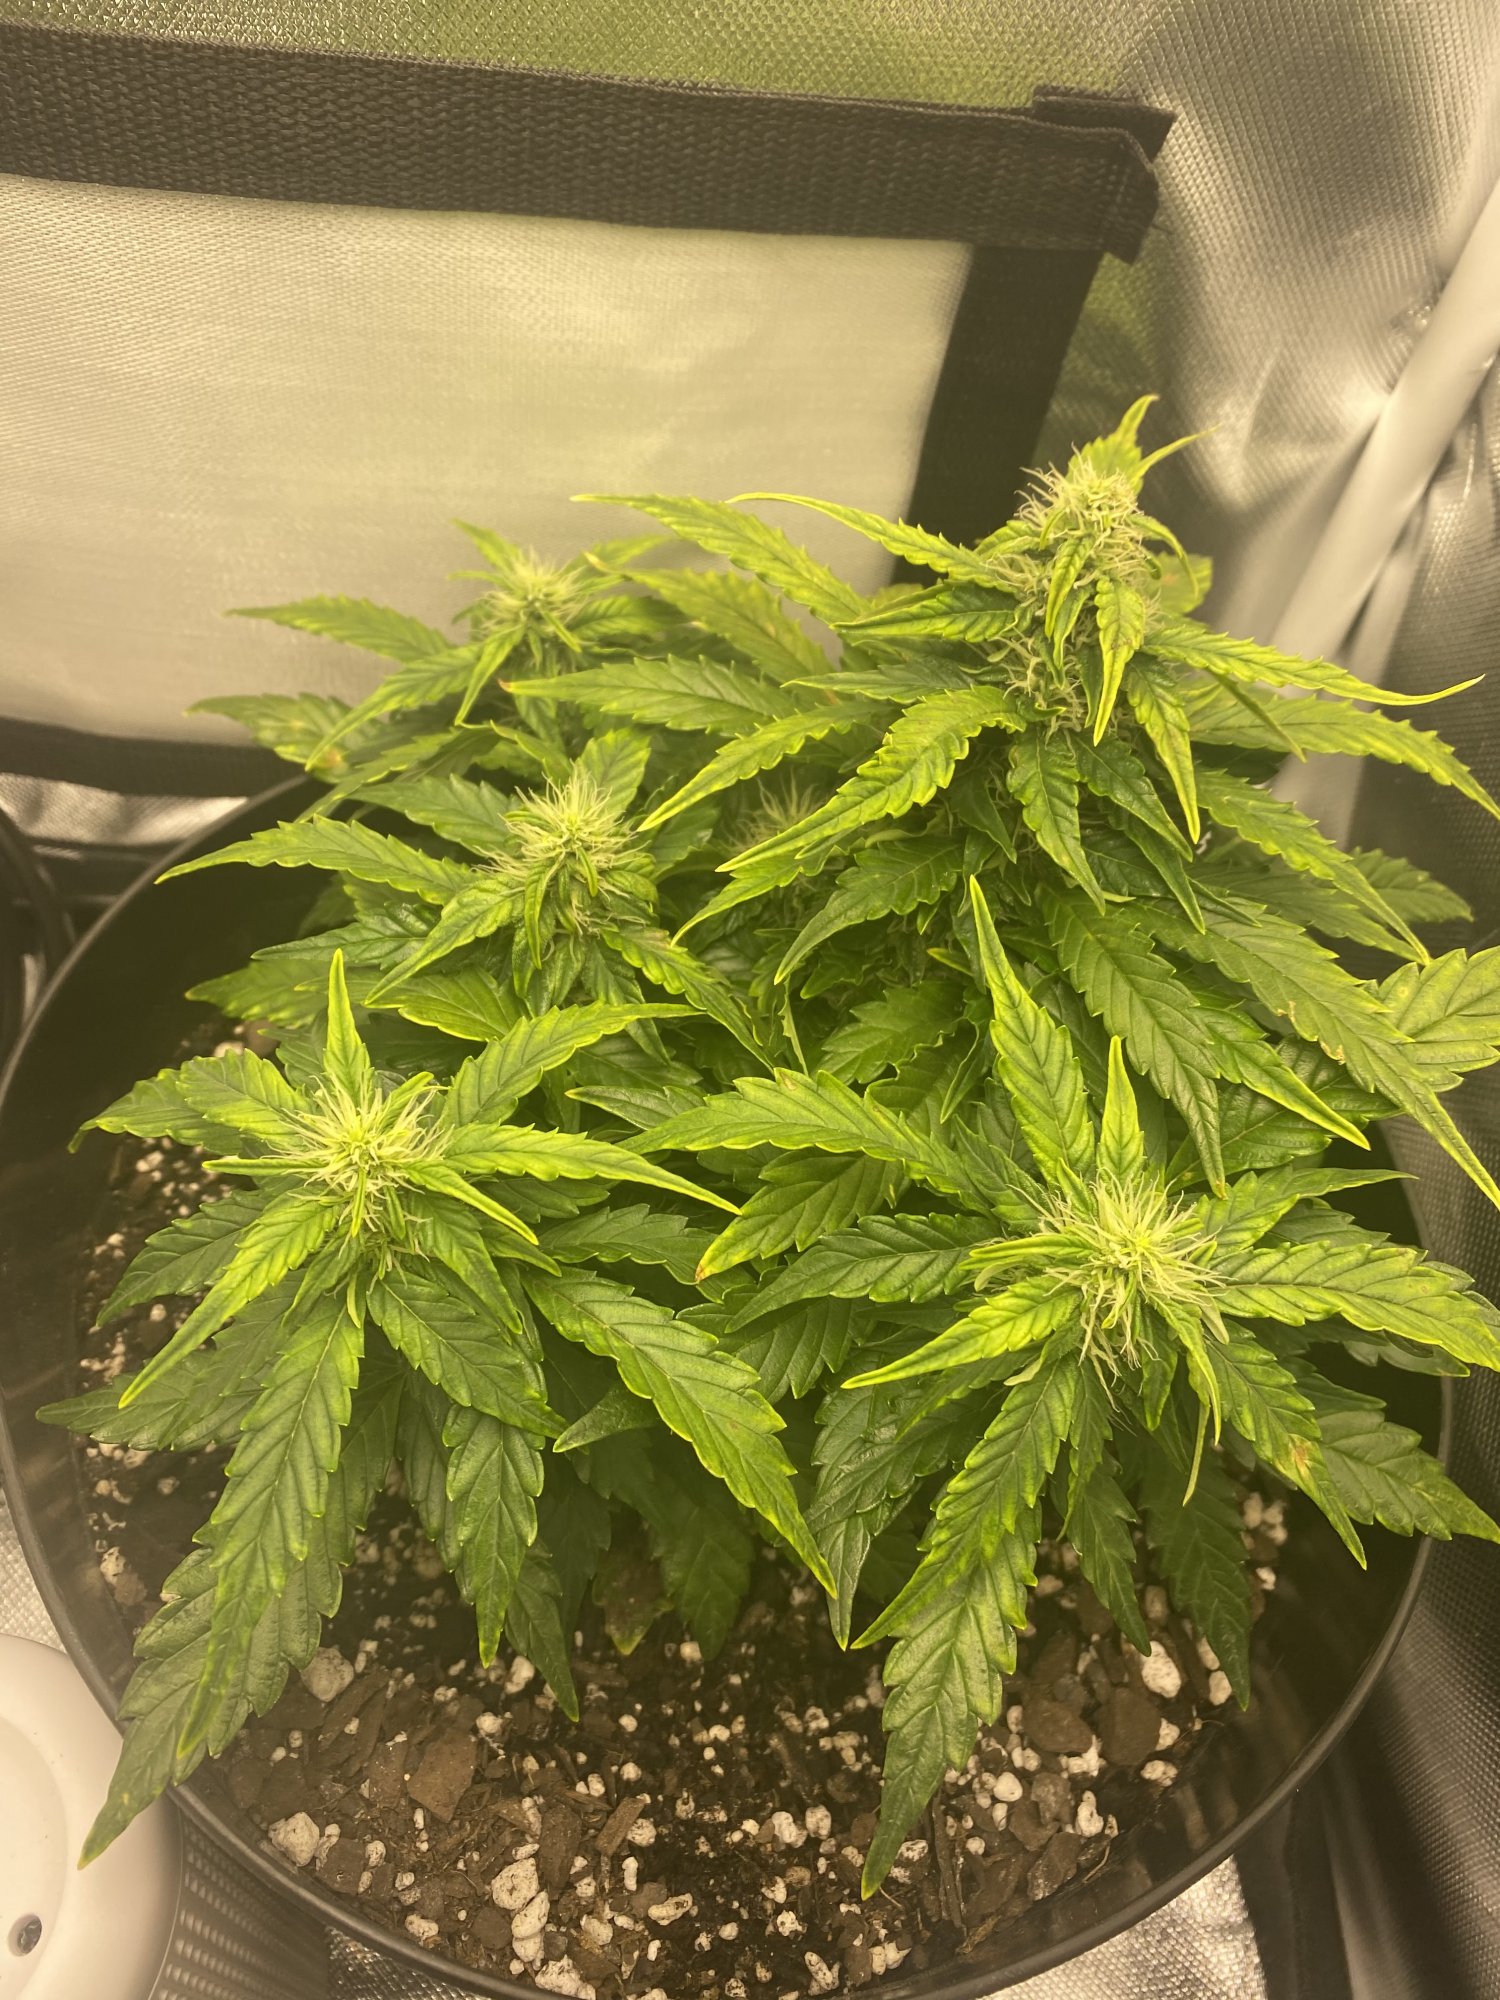 Please help my plants was showing some yellowing and browning a week ago